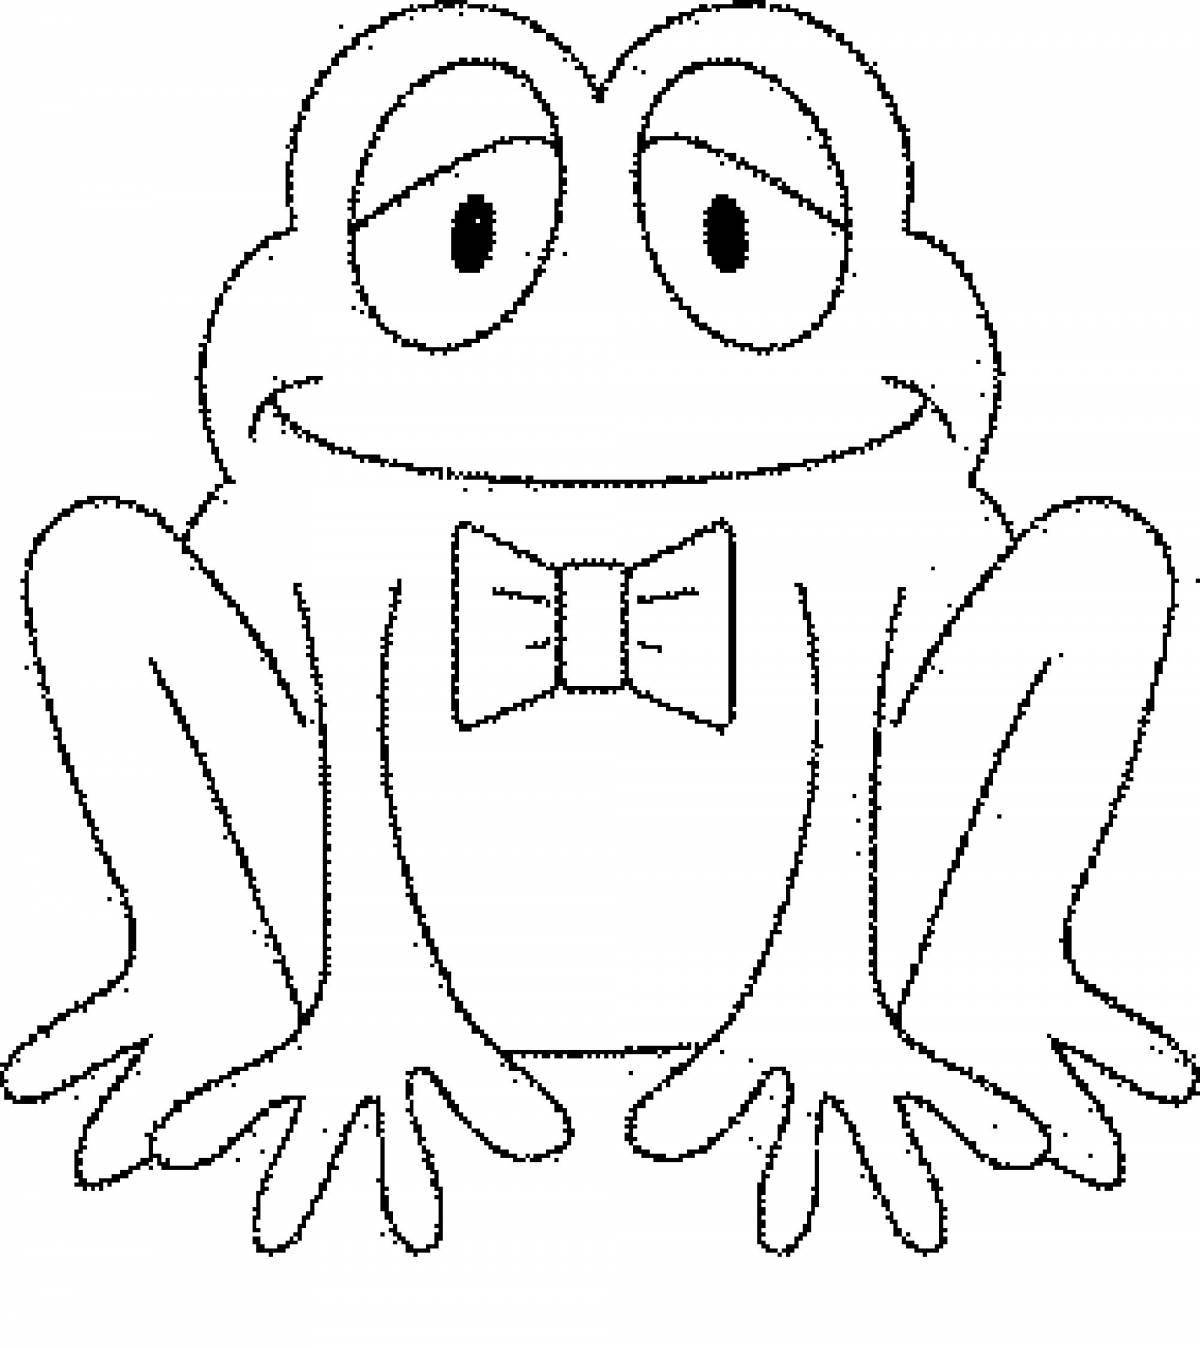 Froggy's amazing coloring book